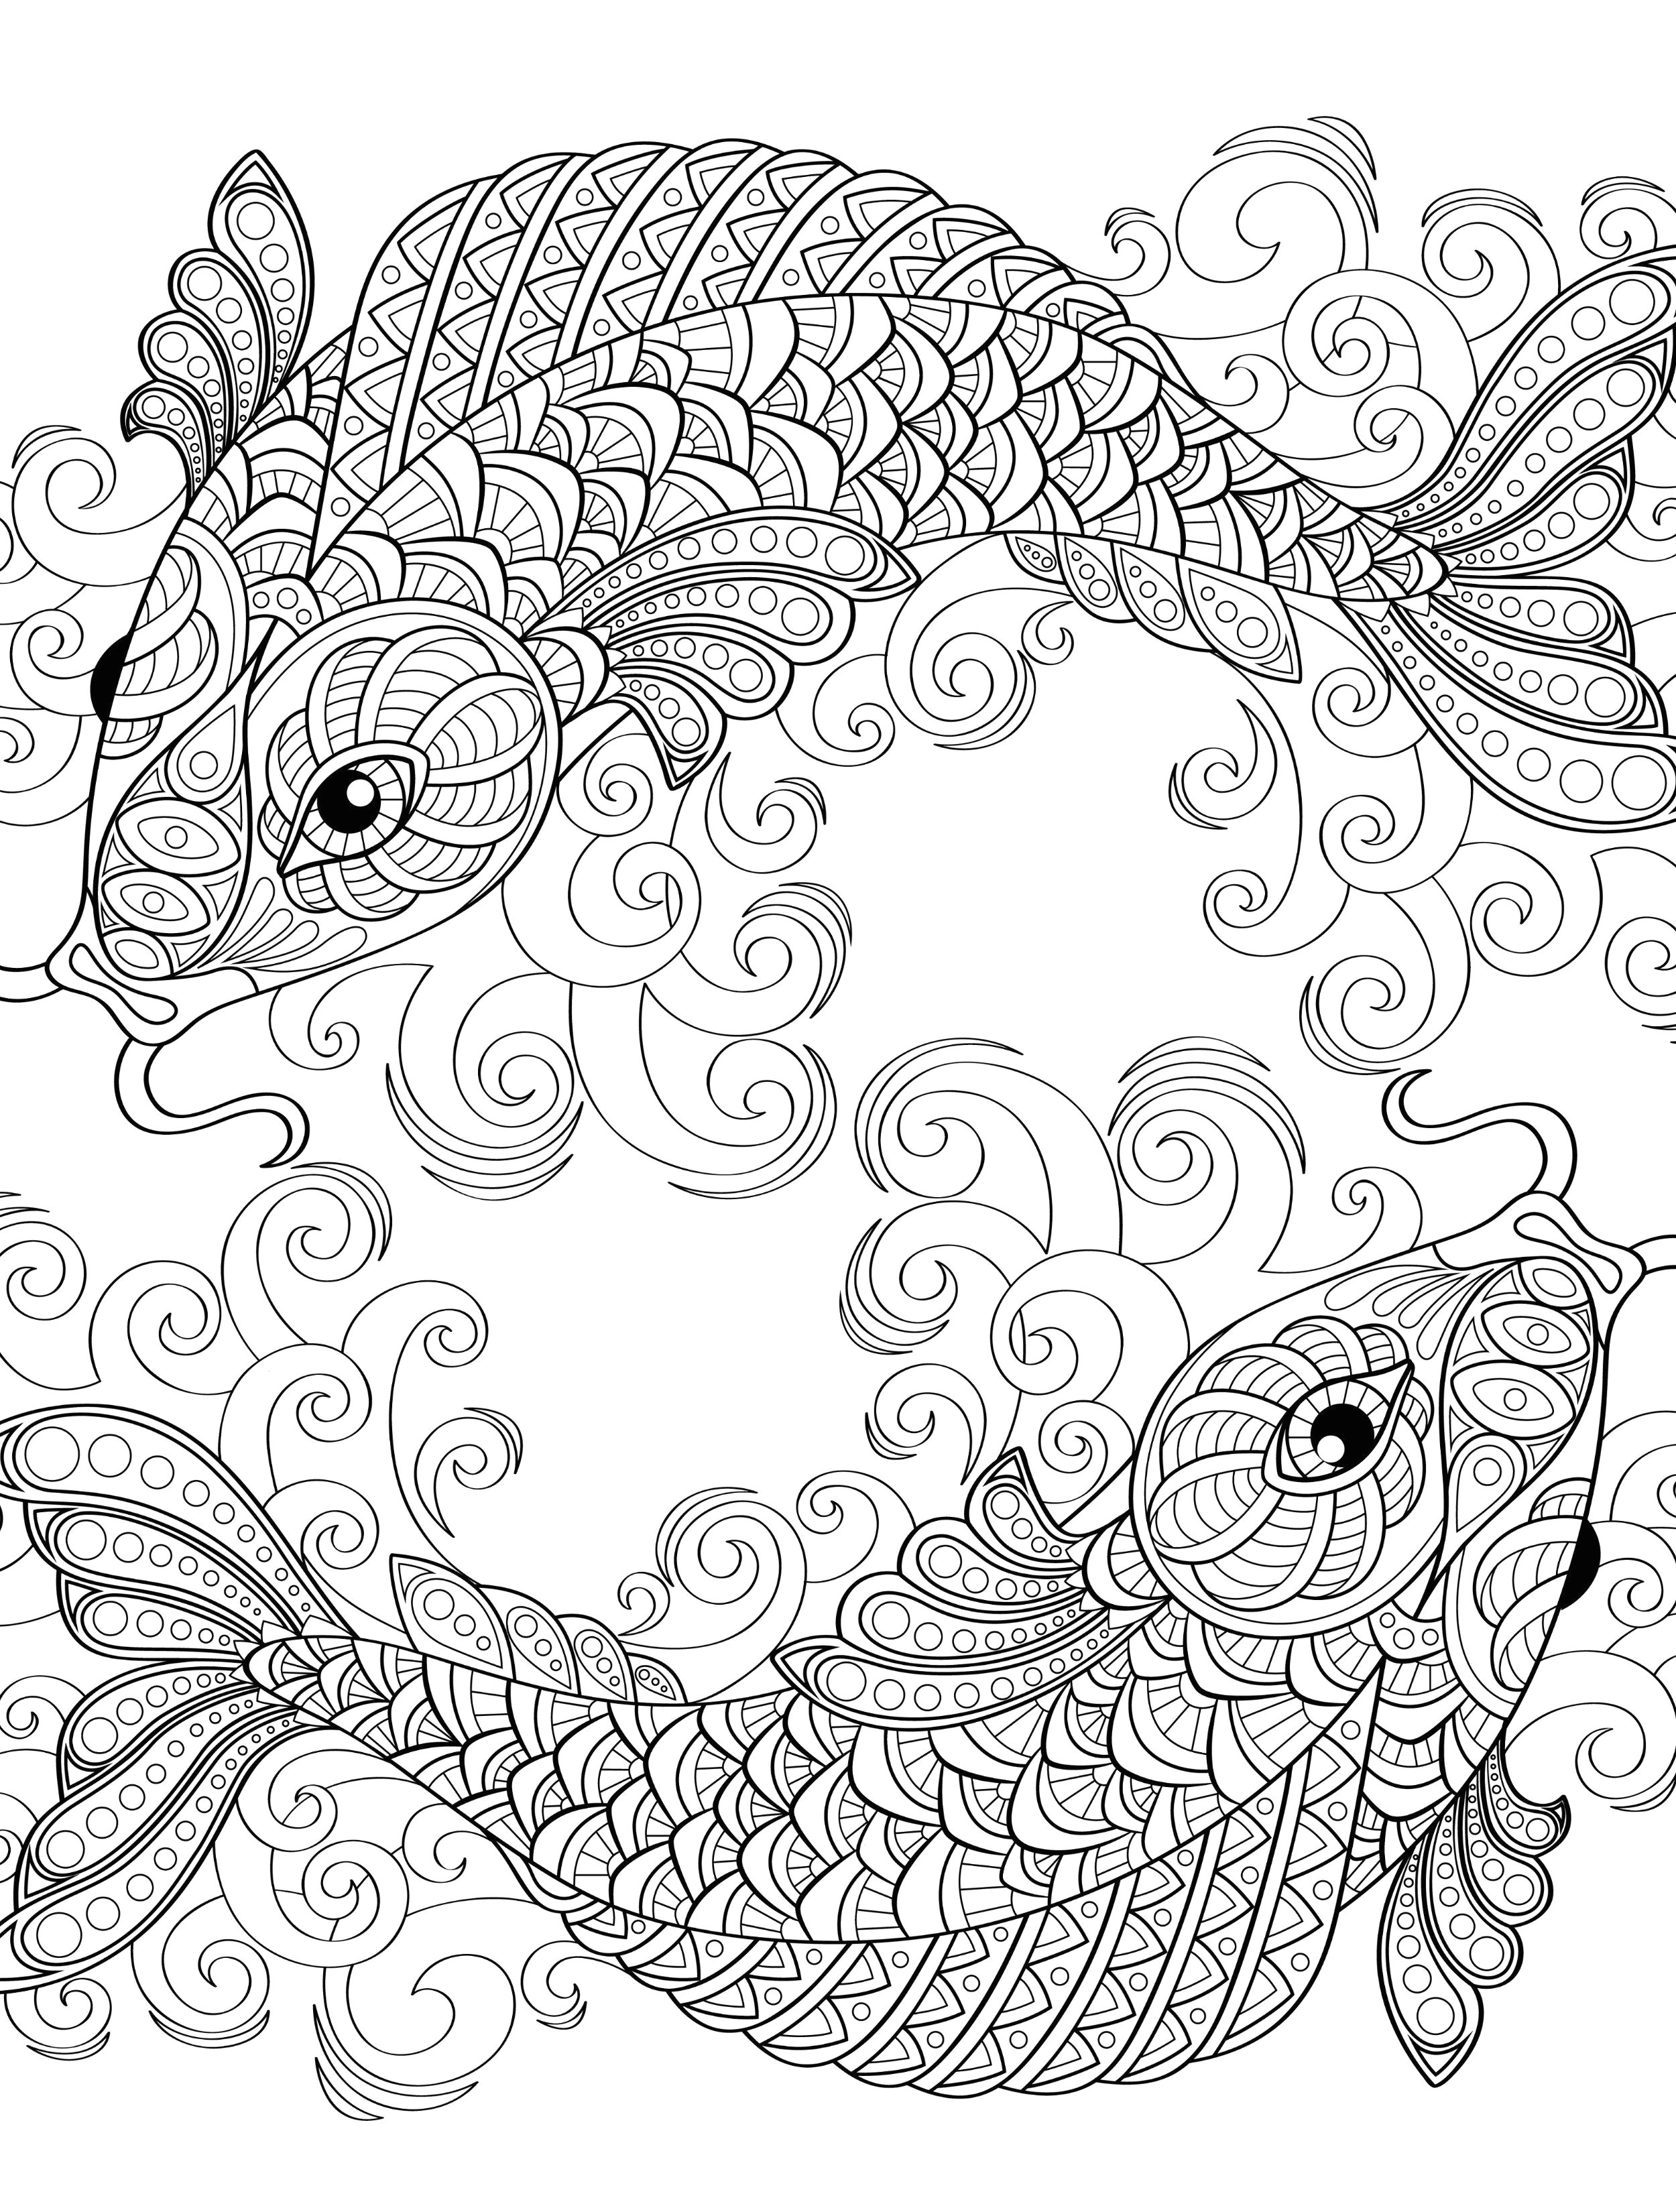 Drawing Skulls Book Skulls Coloring Pages Unique Adult Coloring Pages Skulls Luxury